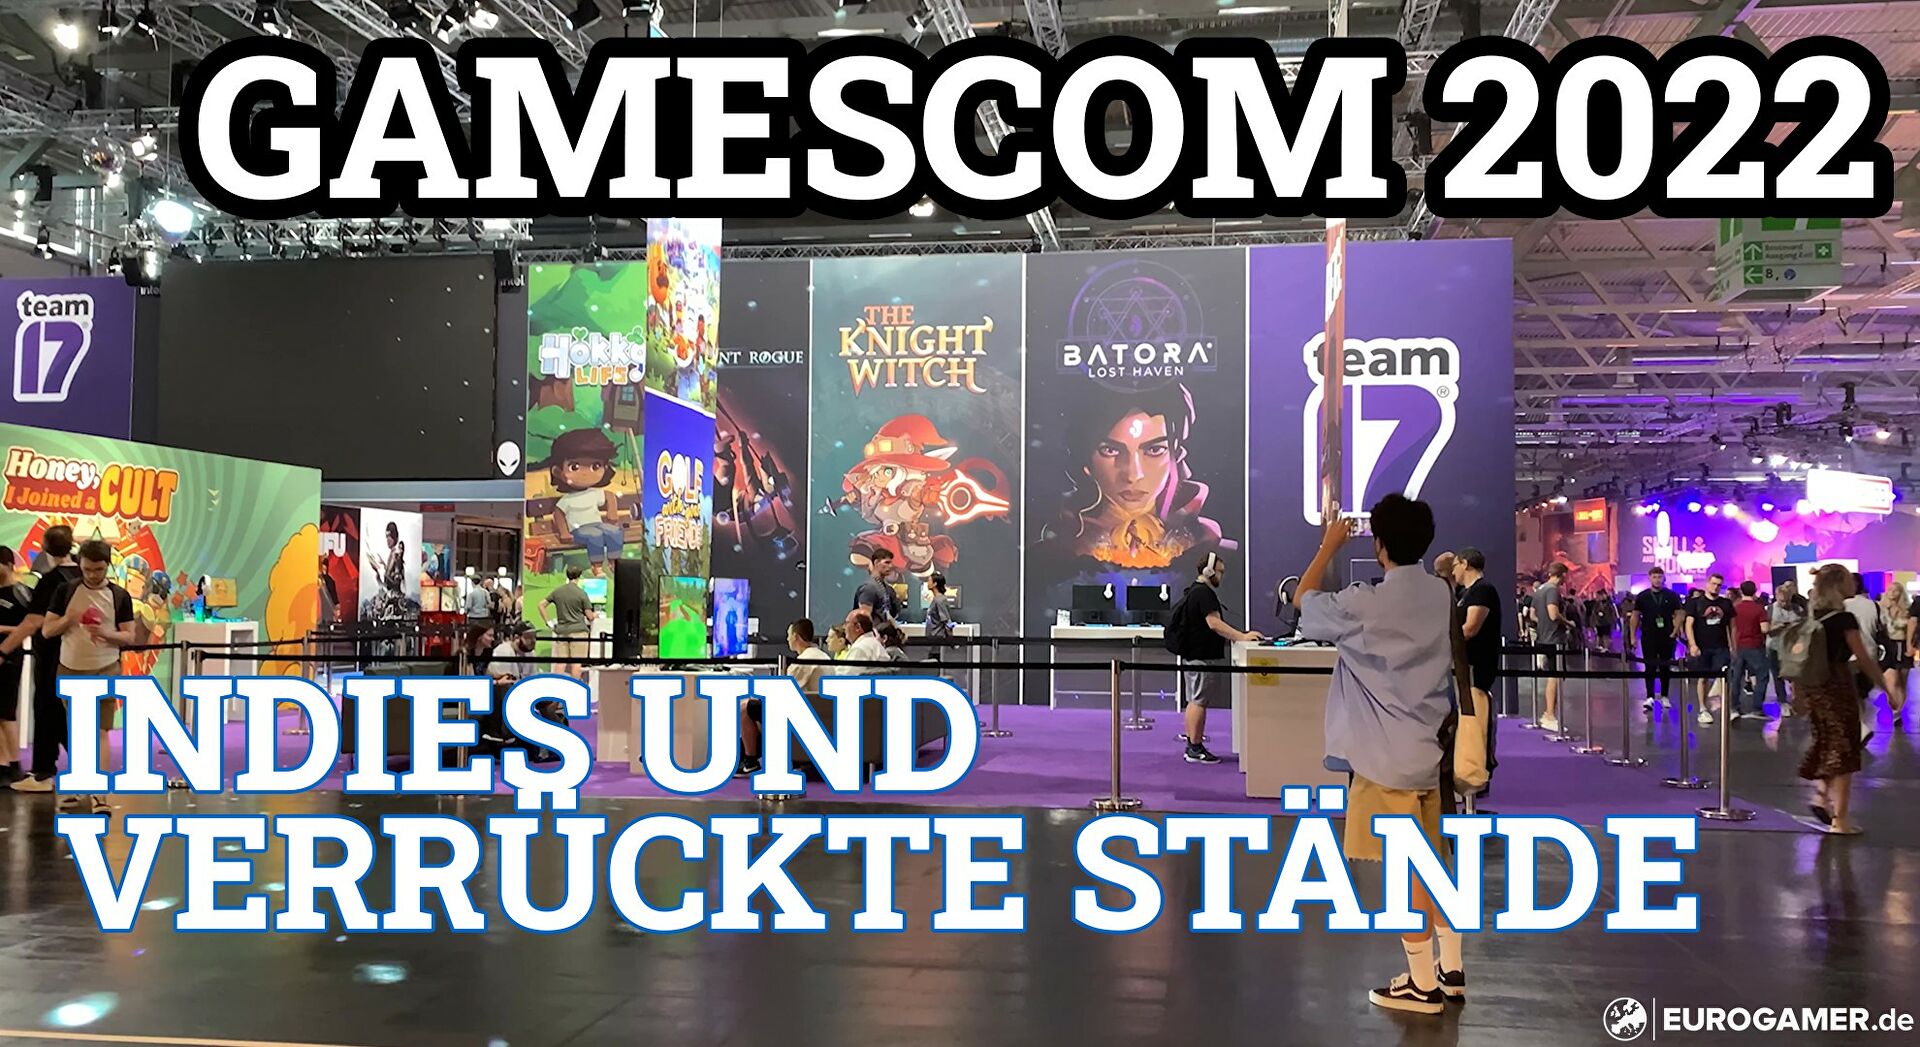 gamescom 2022: The indie area is big but chaotic, so I was able to find crazy stands